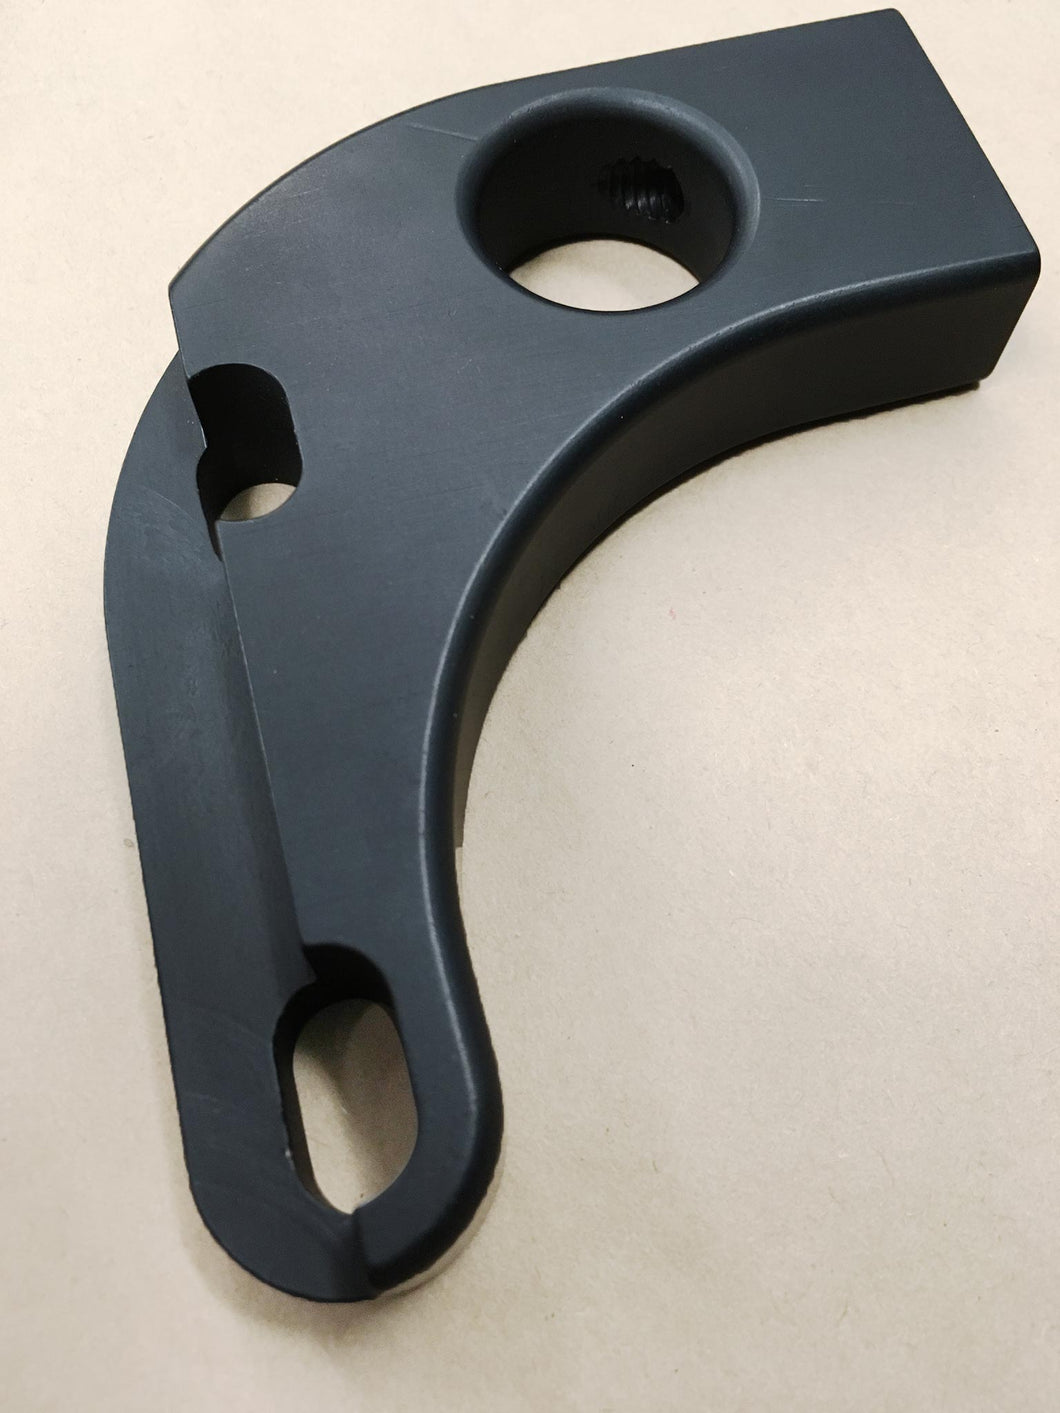 Support Bracket, for Race Hemi Mag Drive